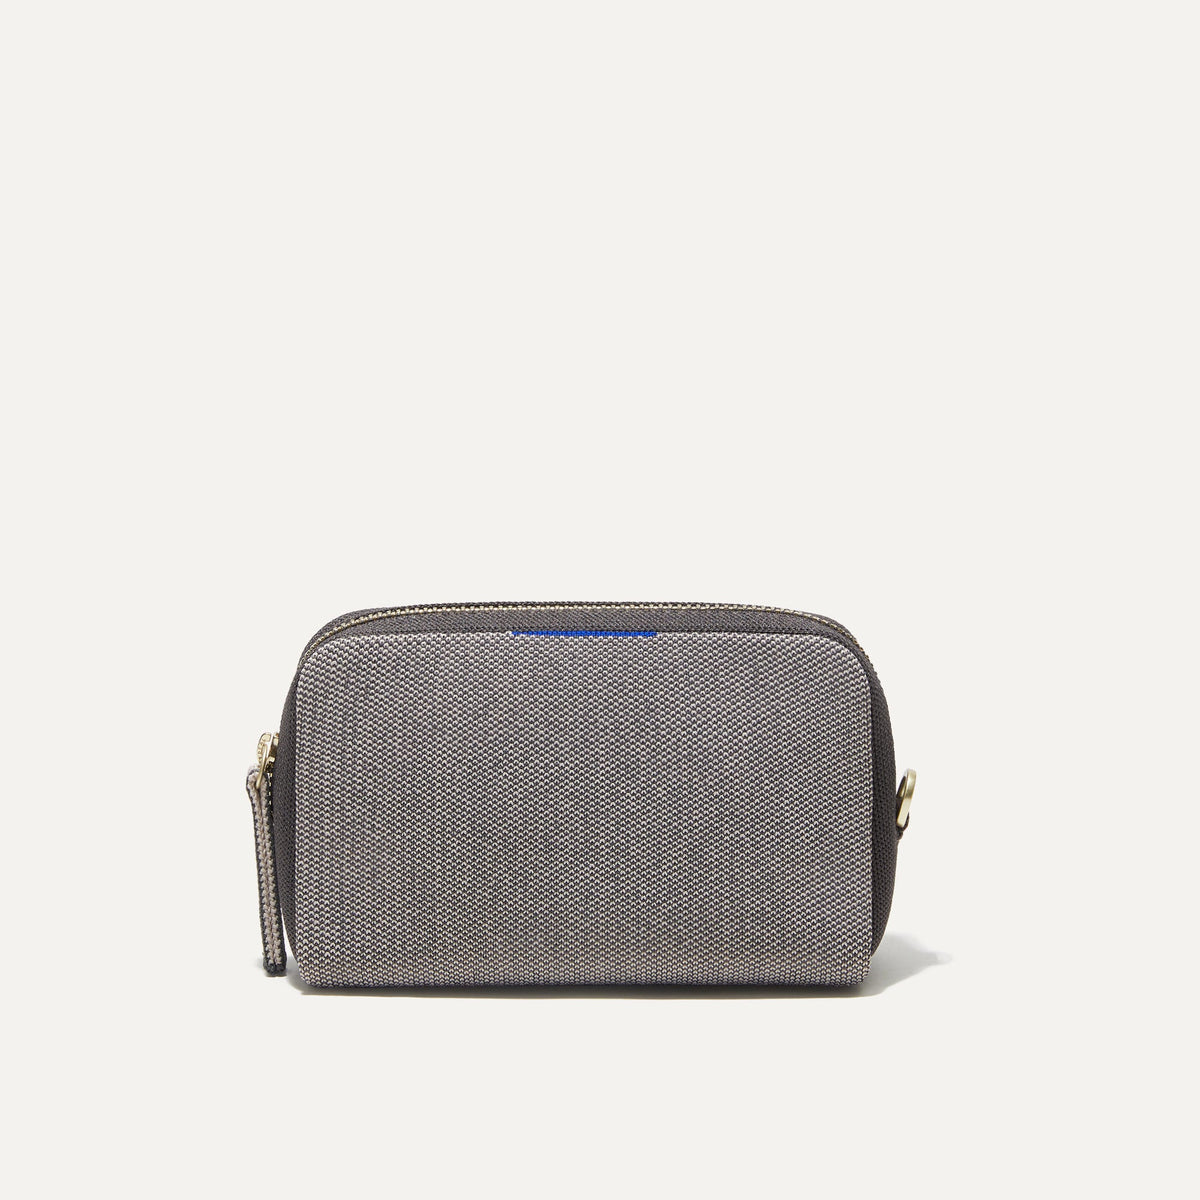 The Mini Universal Pouch in Iron Grey | Rothy's Mini Pouches